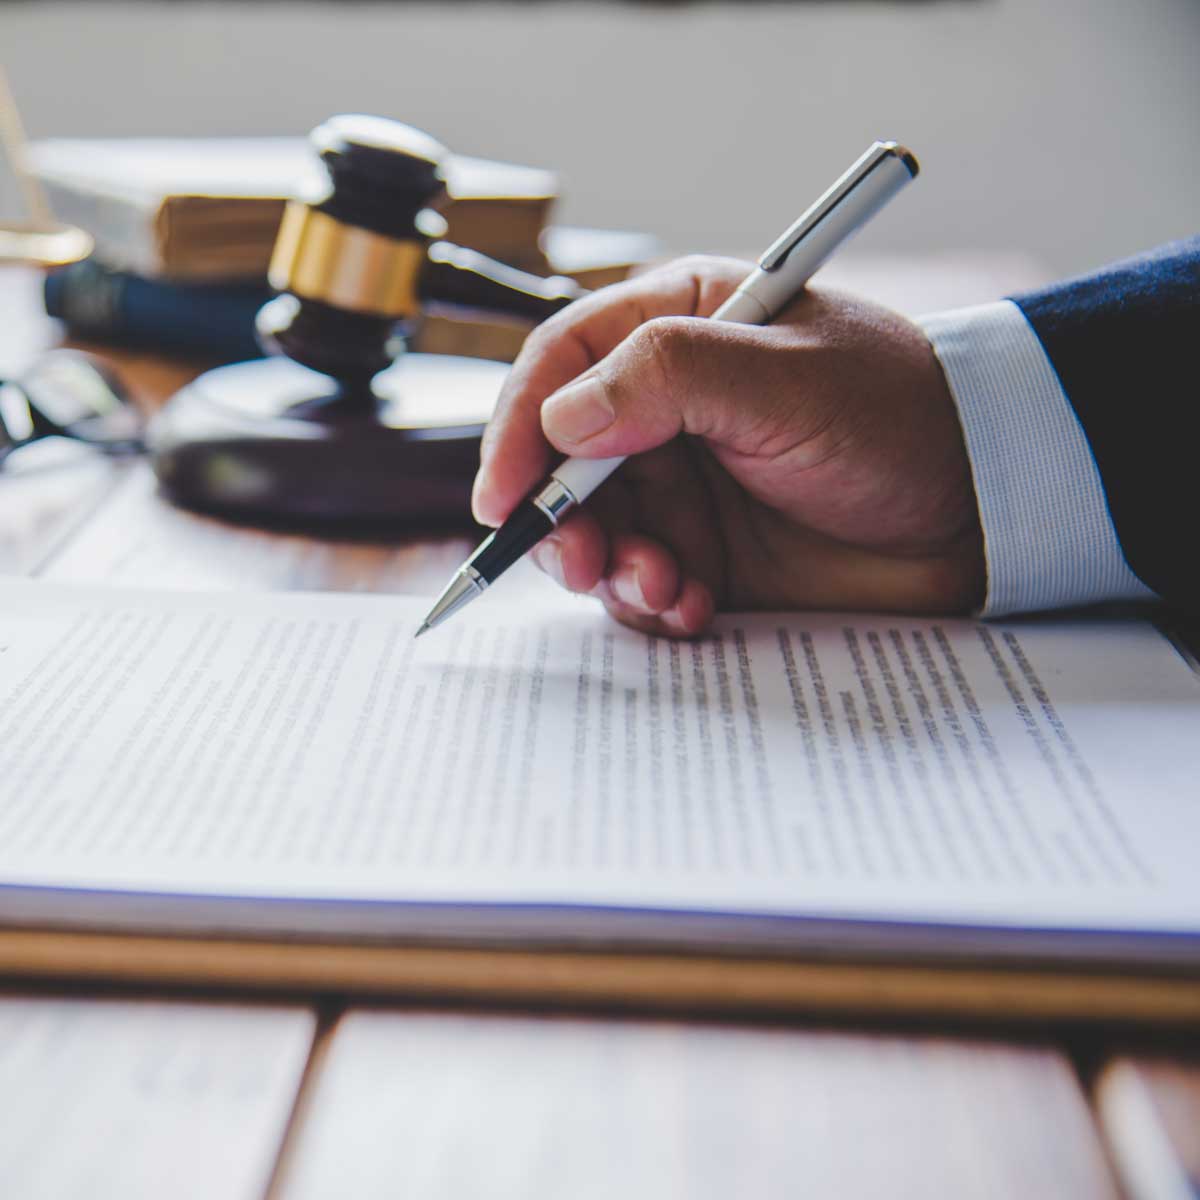 Law theme, mallet of the judge, law enforcement officers, evidence-based cases, and documents taken into account; image of a professionals' hand holding a pen over a legal document